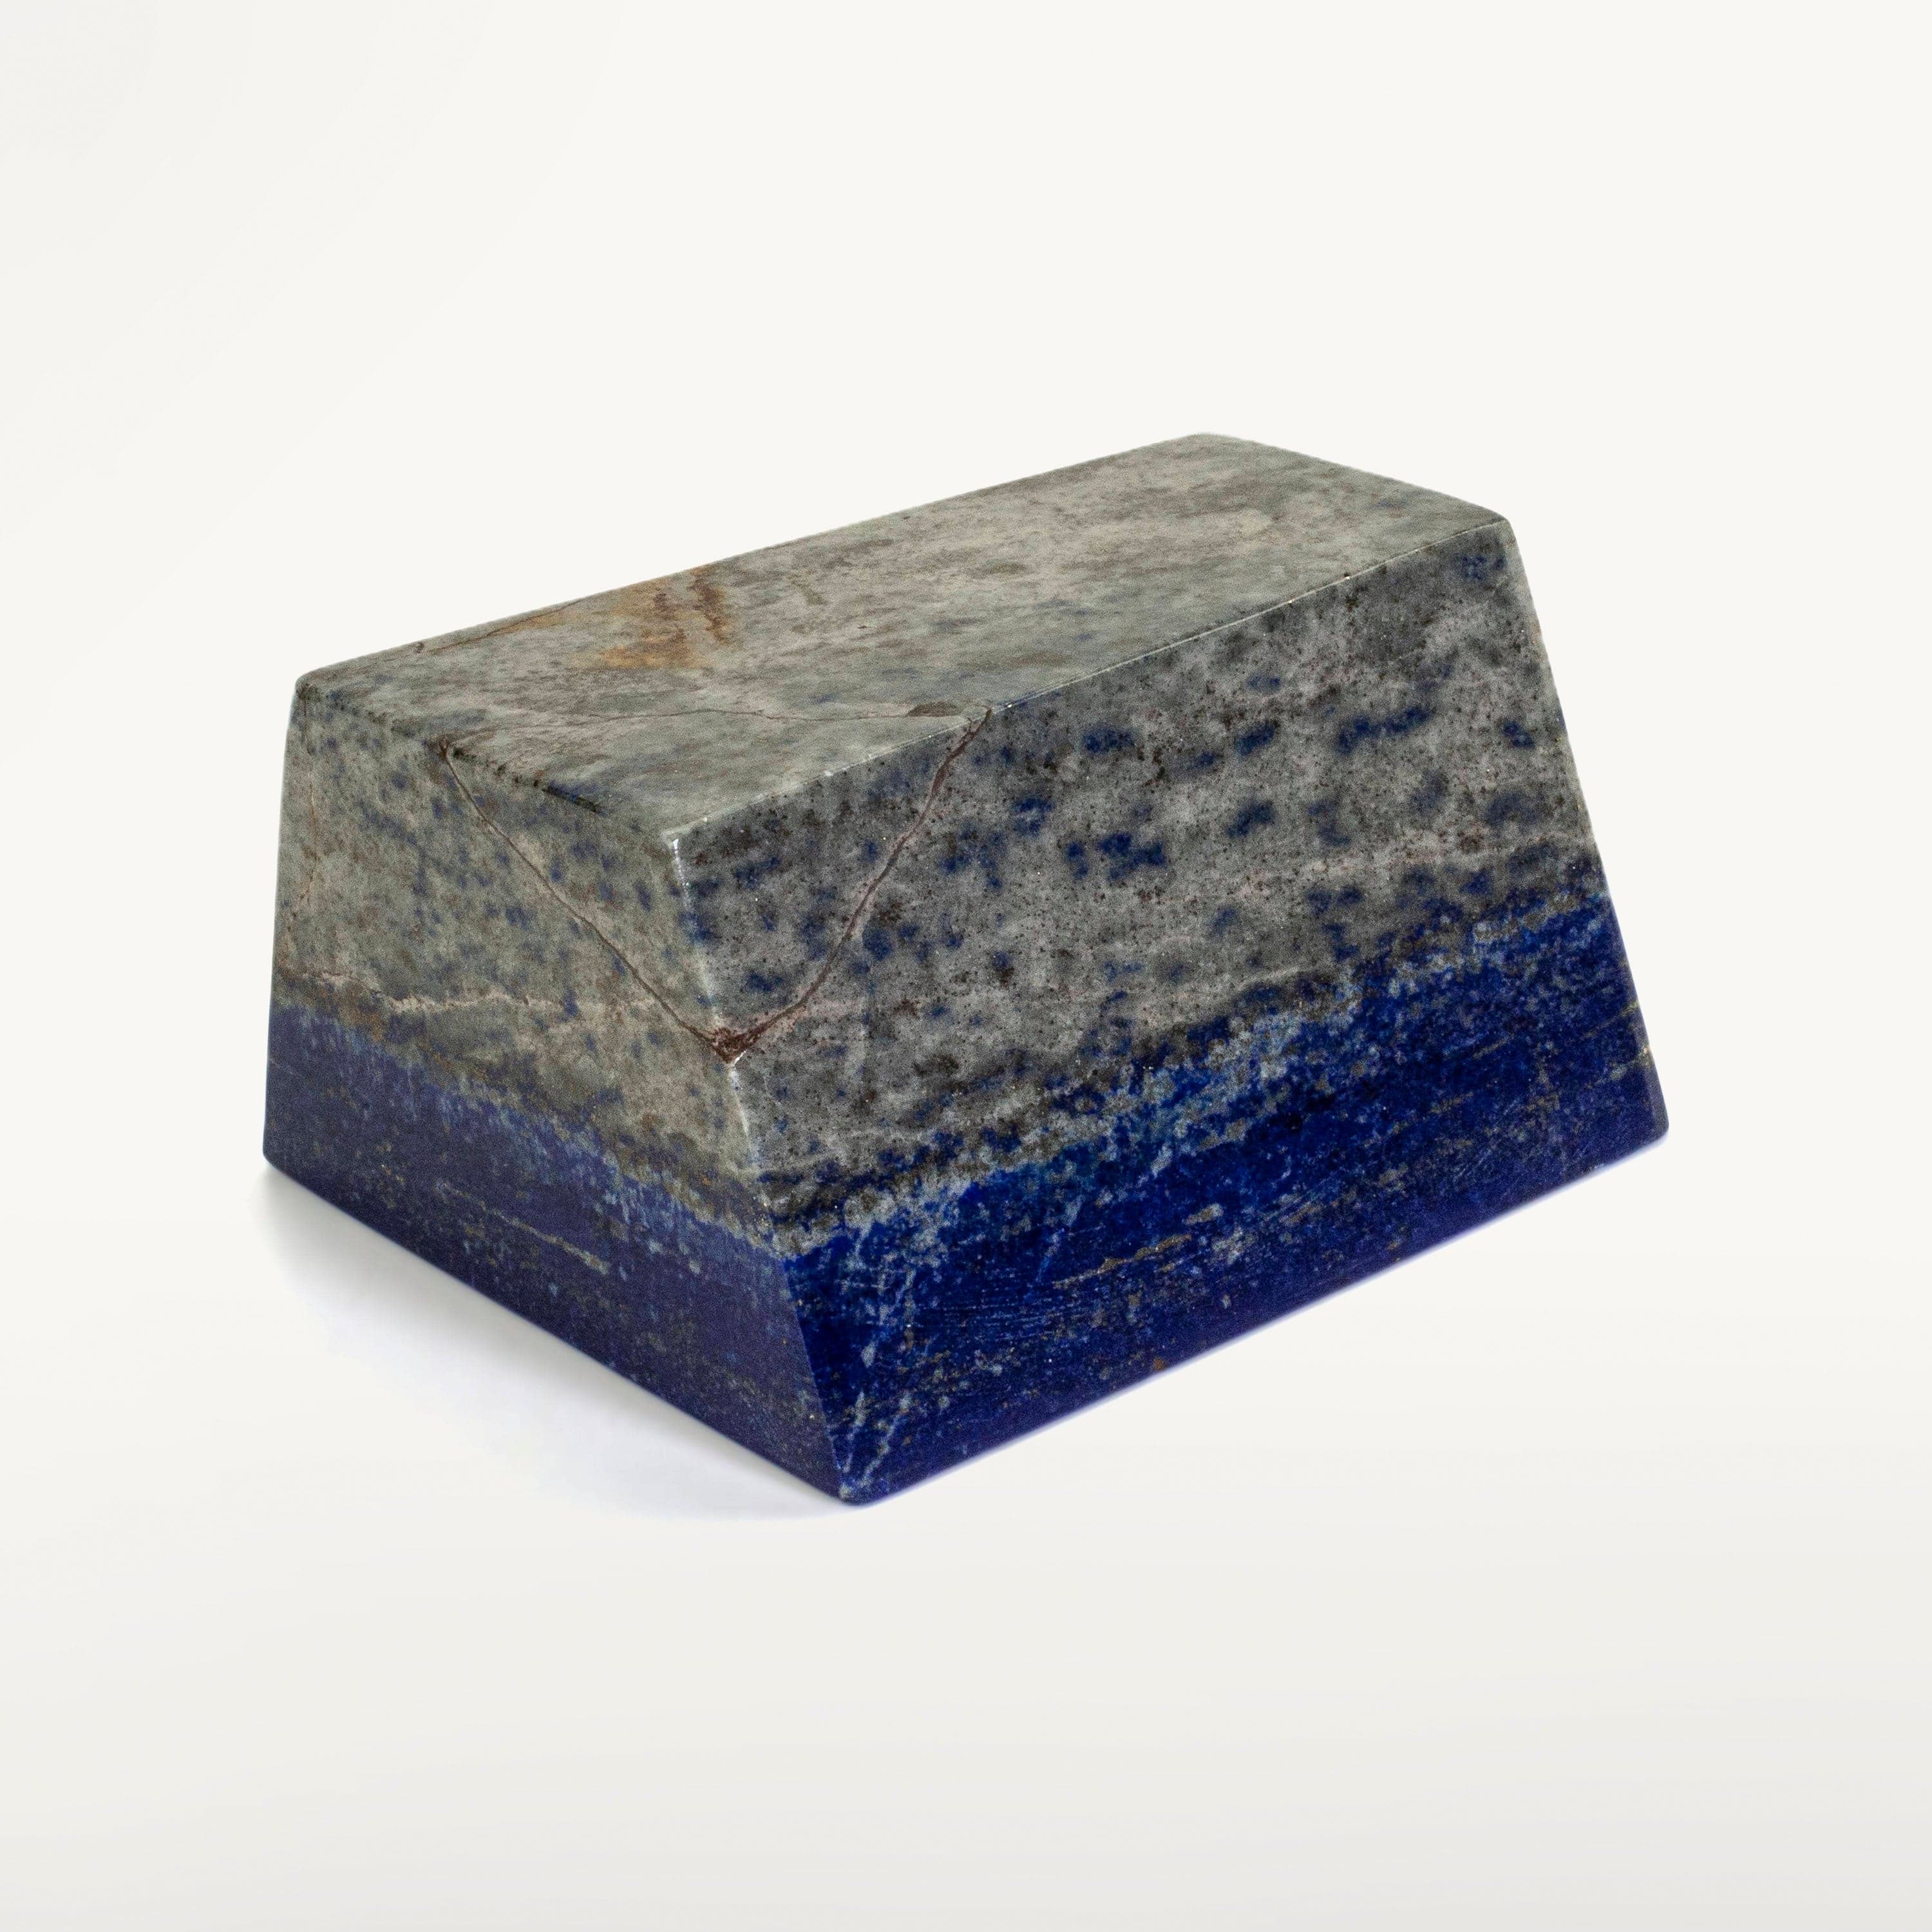 Kalifano Lapis Lapis Lazuil Freeform from Afghanistan - 375 g / 0.8 lbs LP400.007